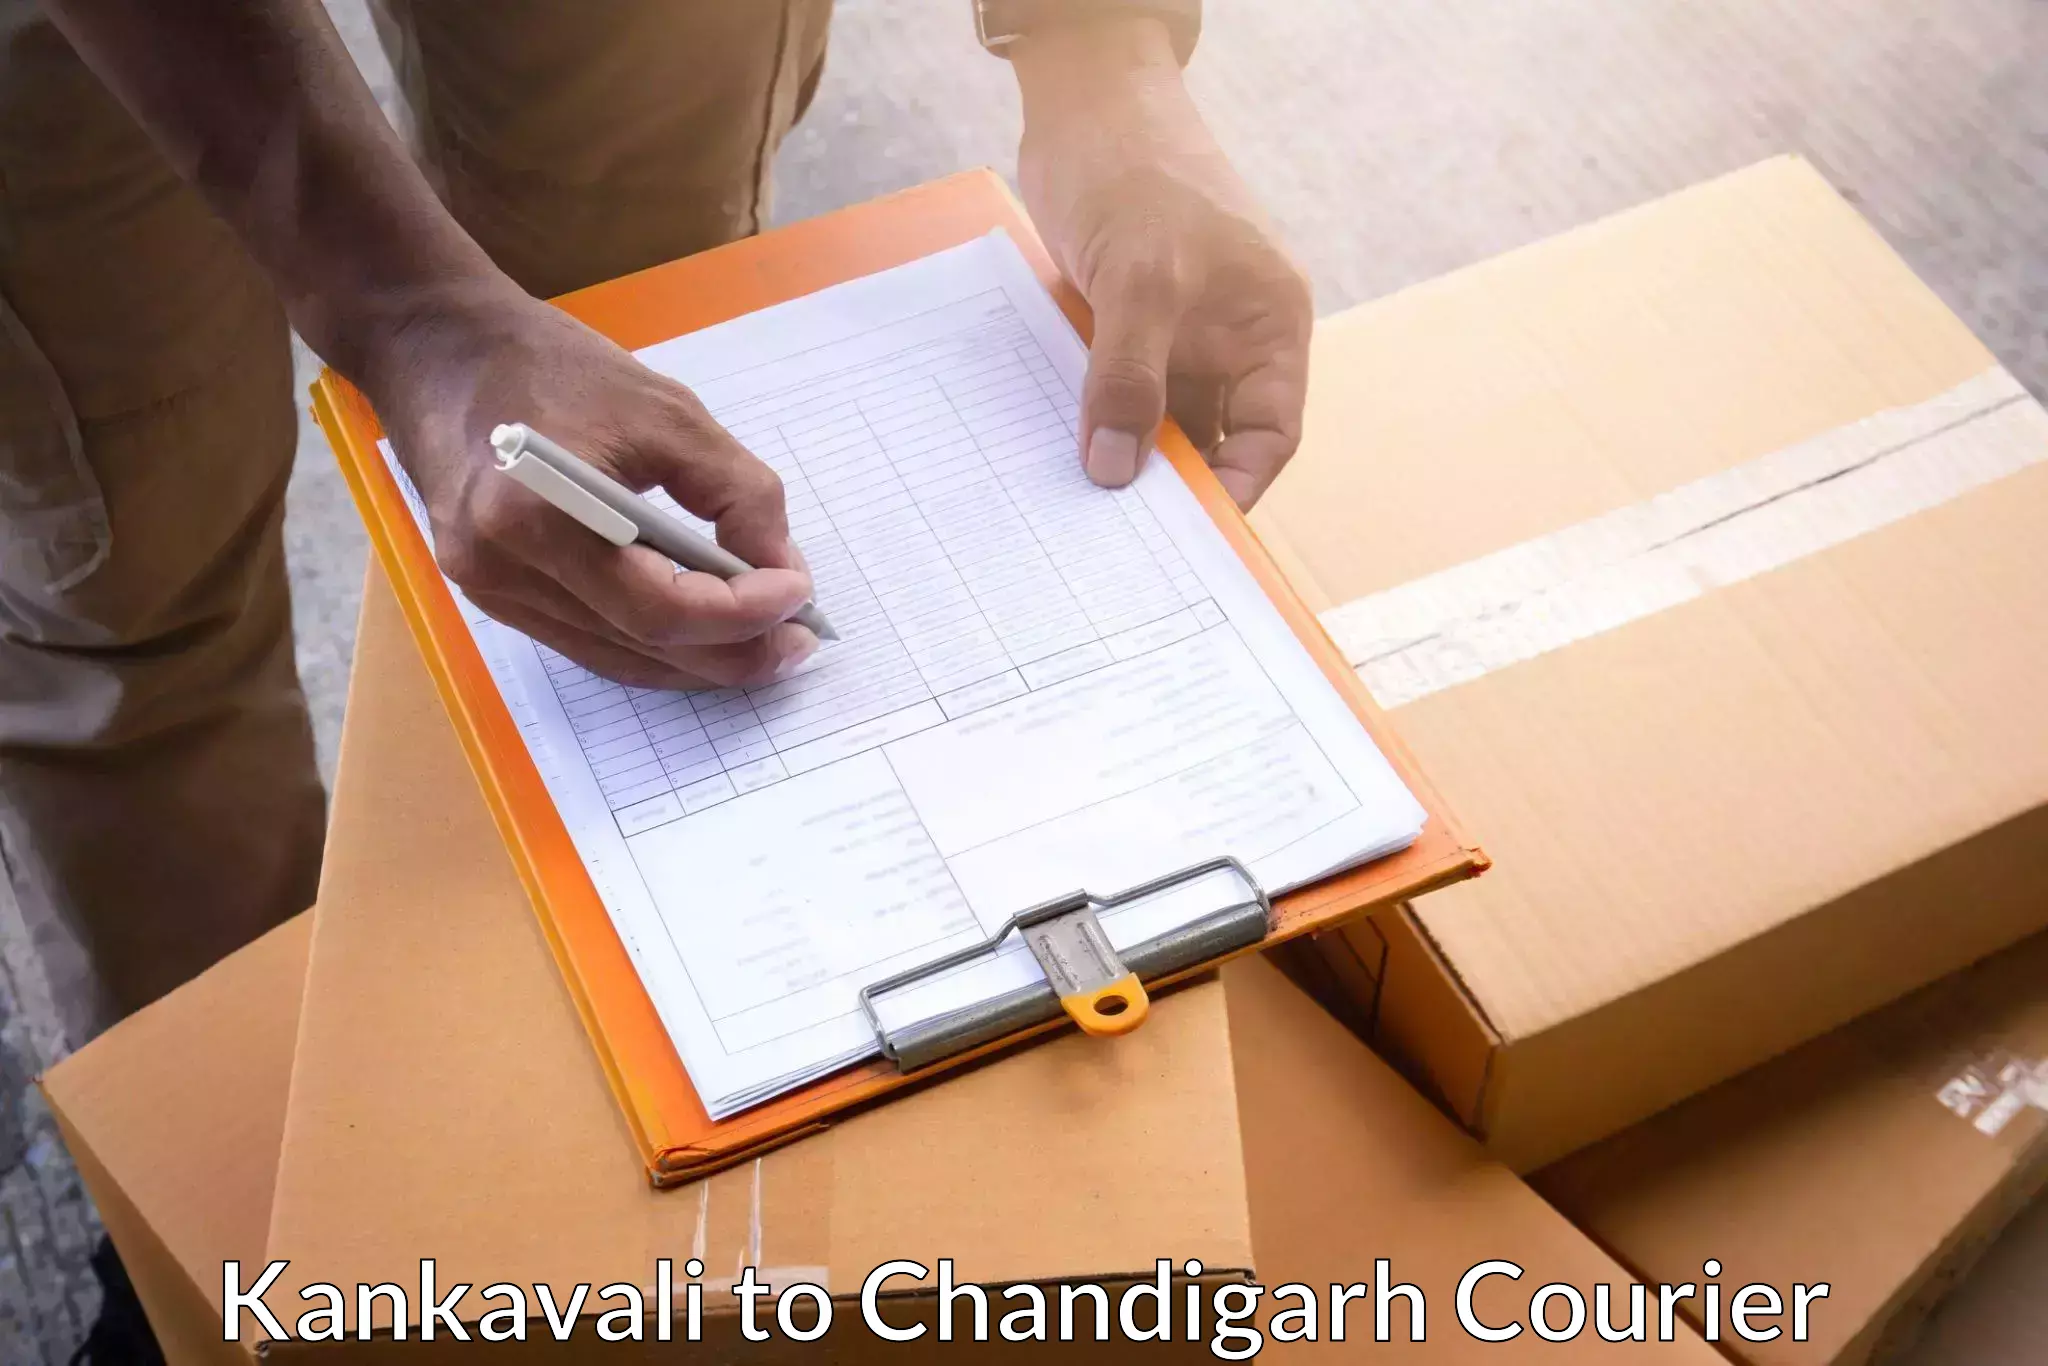 Fragile item shipping in Kankavali to Chandigarh